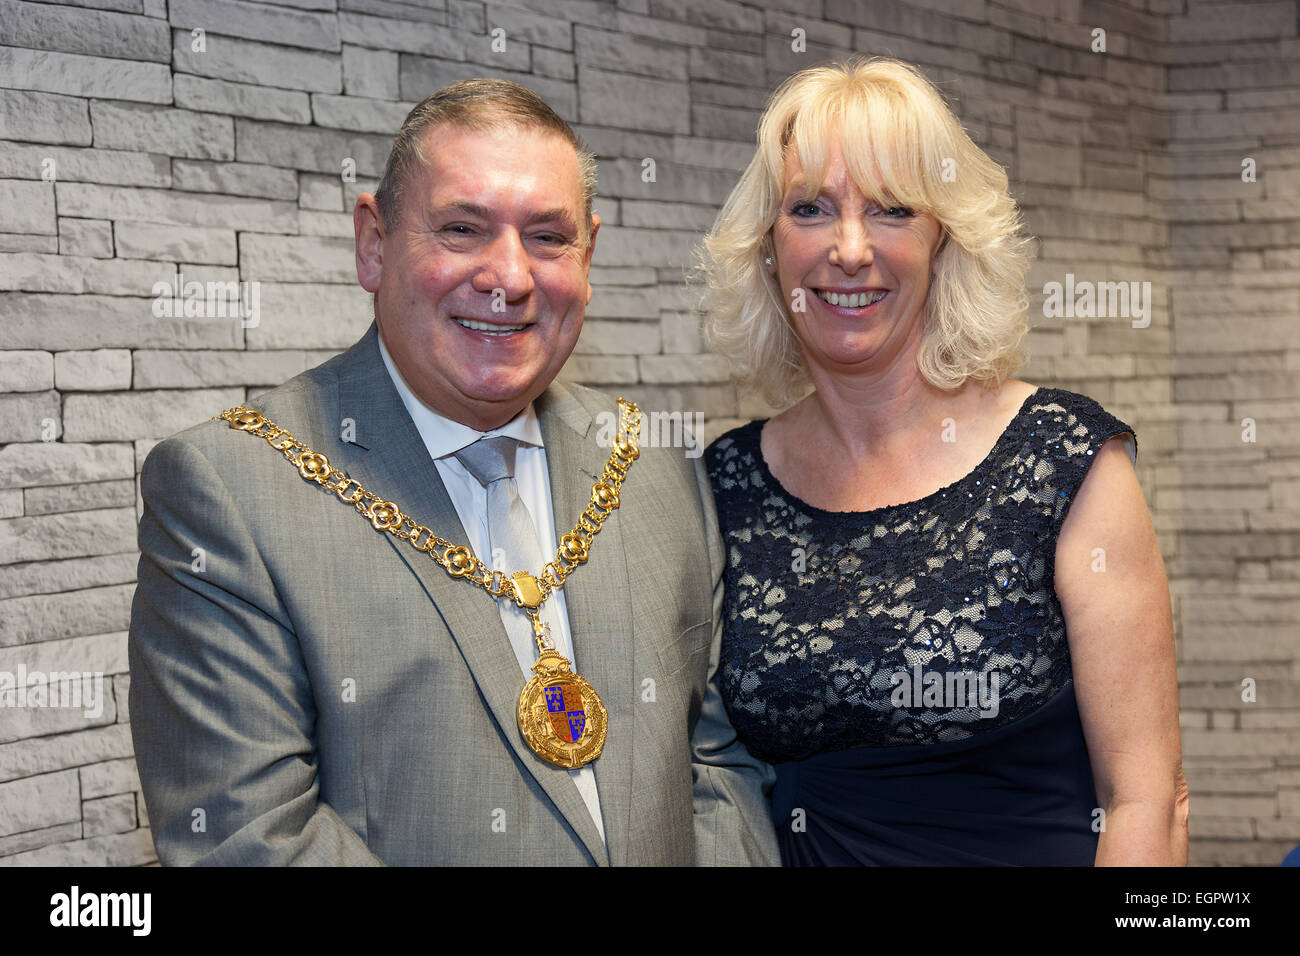 Walsall, West Midlands, UK. 28th February, 2015. Councillor Pete Smith Mayor of Walsall with Monica Price presenter of the Cuppa TV programme at the launch of the new Midlands television station. Big Centre TV is the new local television station for the Midlands – Birmingham, Walsall, Wolverhampton, Solihull and The Black Country. The channel went on air on Freeview channel 8 at 6pm on Saturday 28 February 2015. The station serves a potential audience of 2.3 million around Birmingham and the Black Country. Credit:  John Henshall/Alamy Live News PER0447 Stock Photo